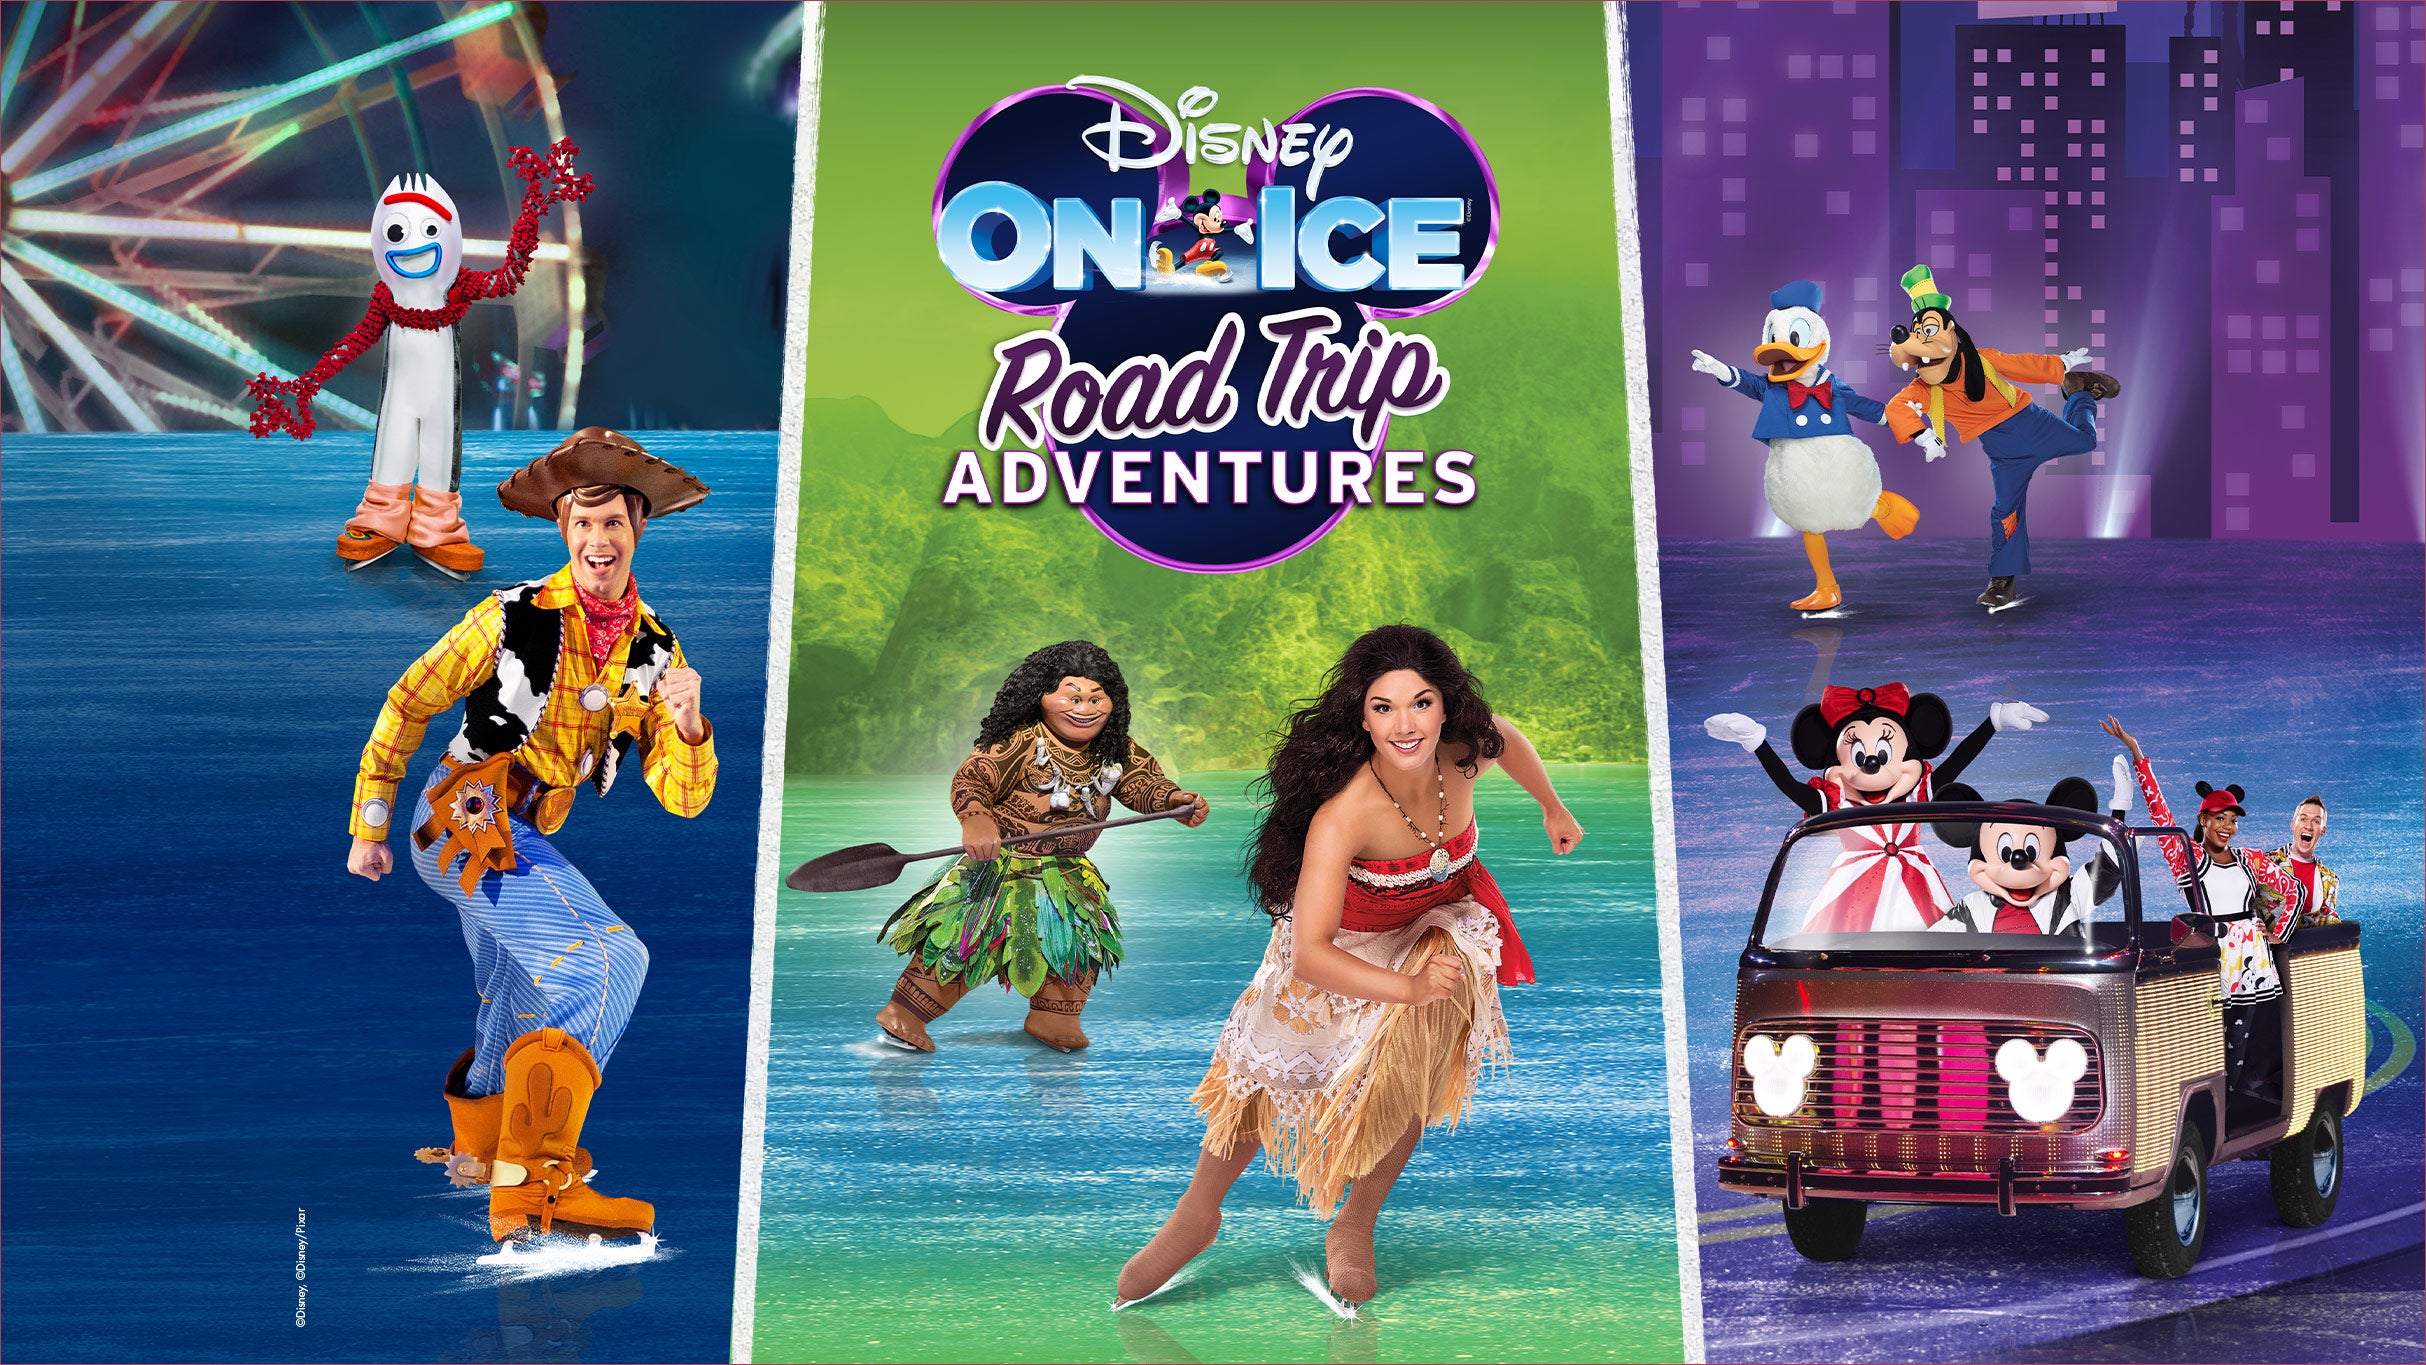 Disney On Ice presents Road Trip Adventures in Newcastle Upon Tyne promo photo for Ticketmaster presale offer code